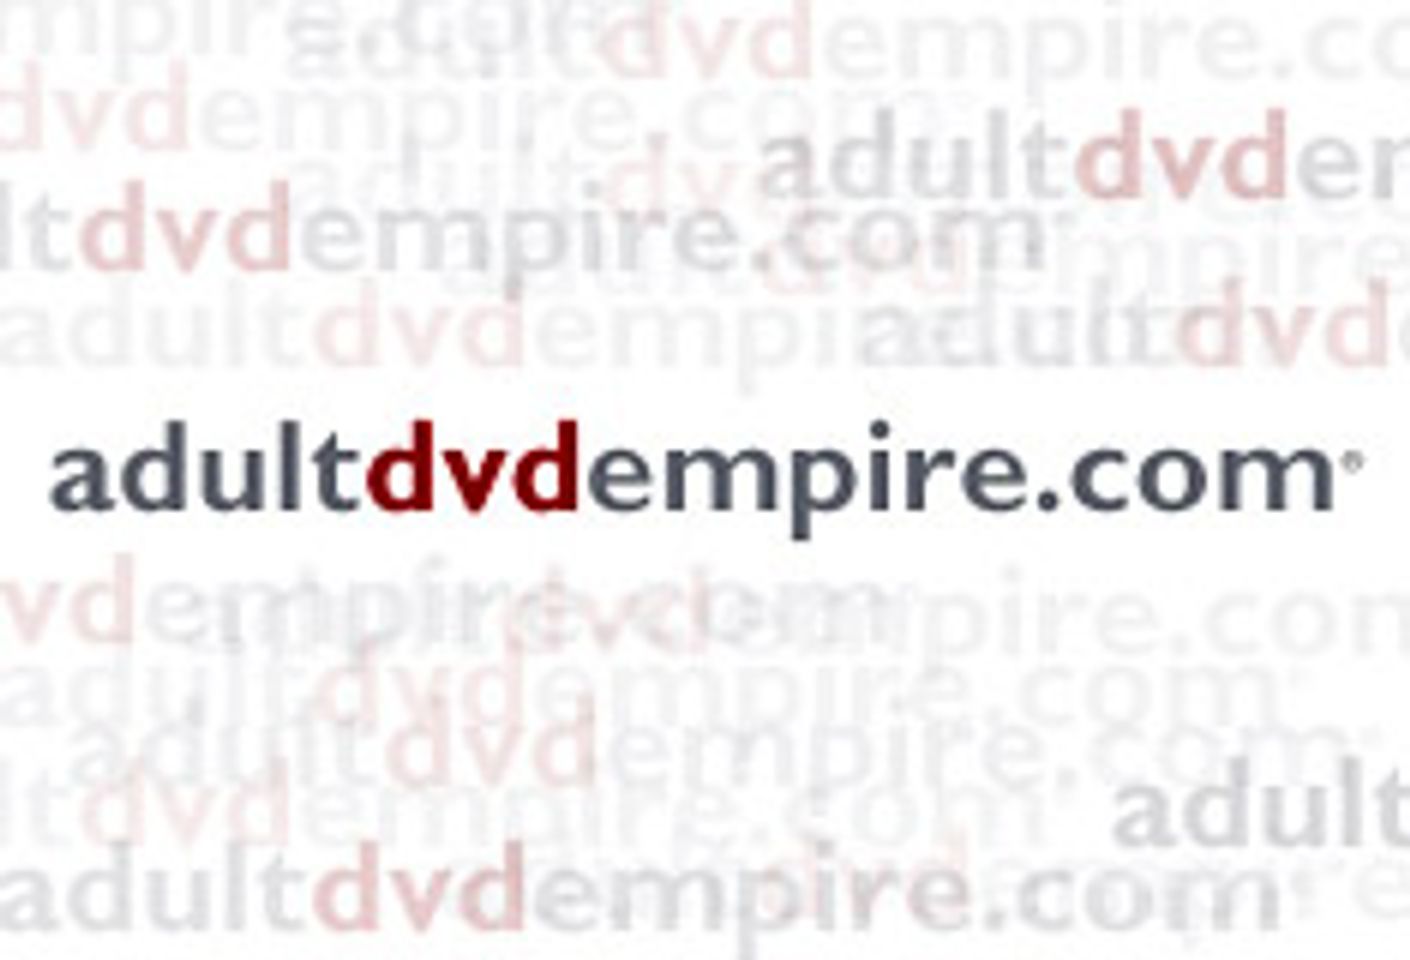 Adult DVD Empire Launches Contest for Adult Film Star Ball